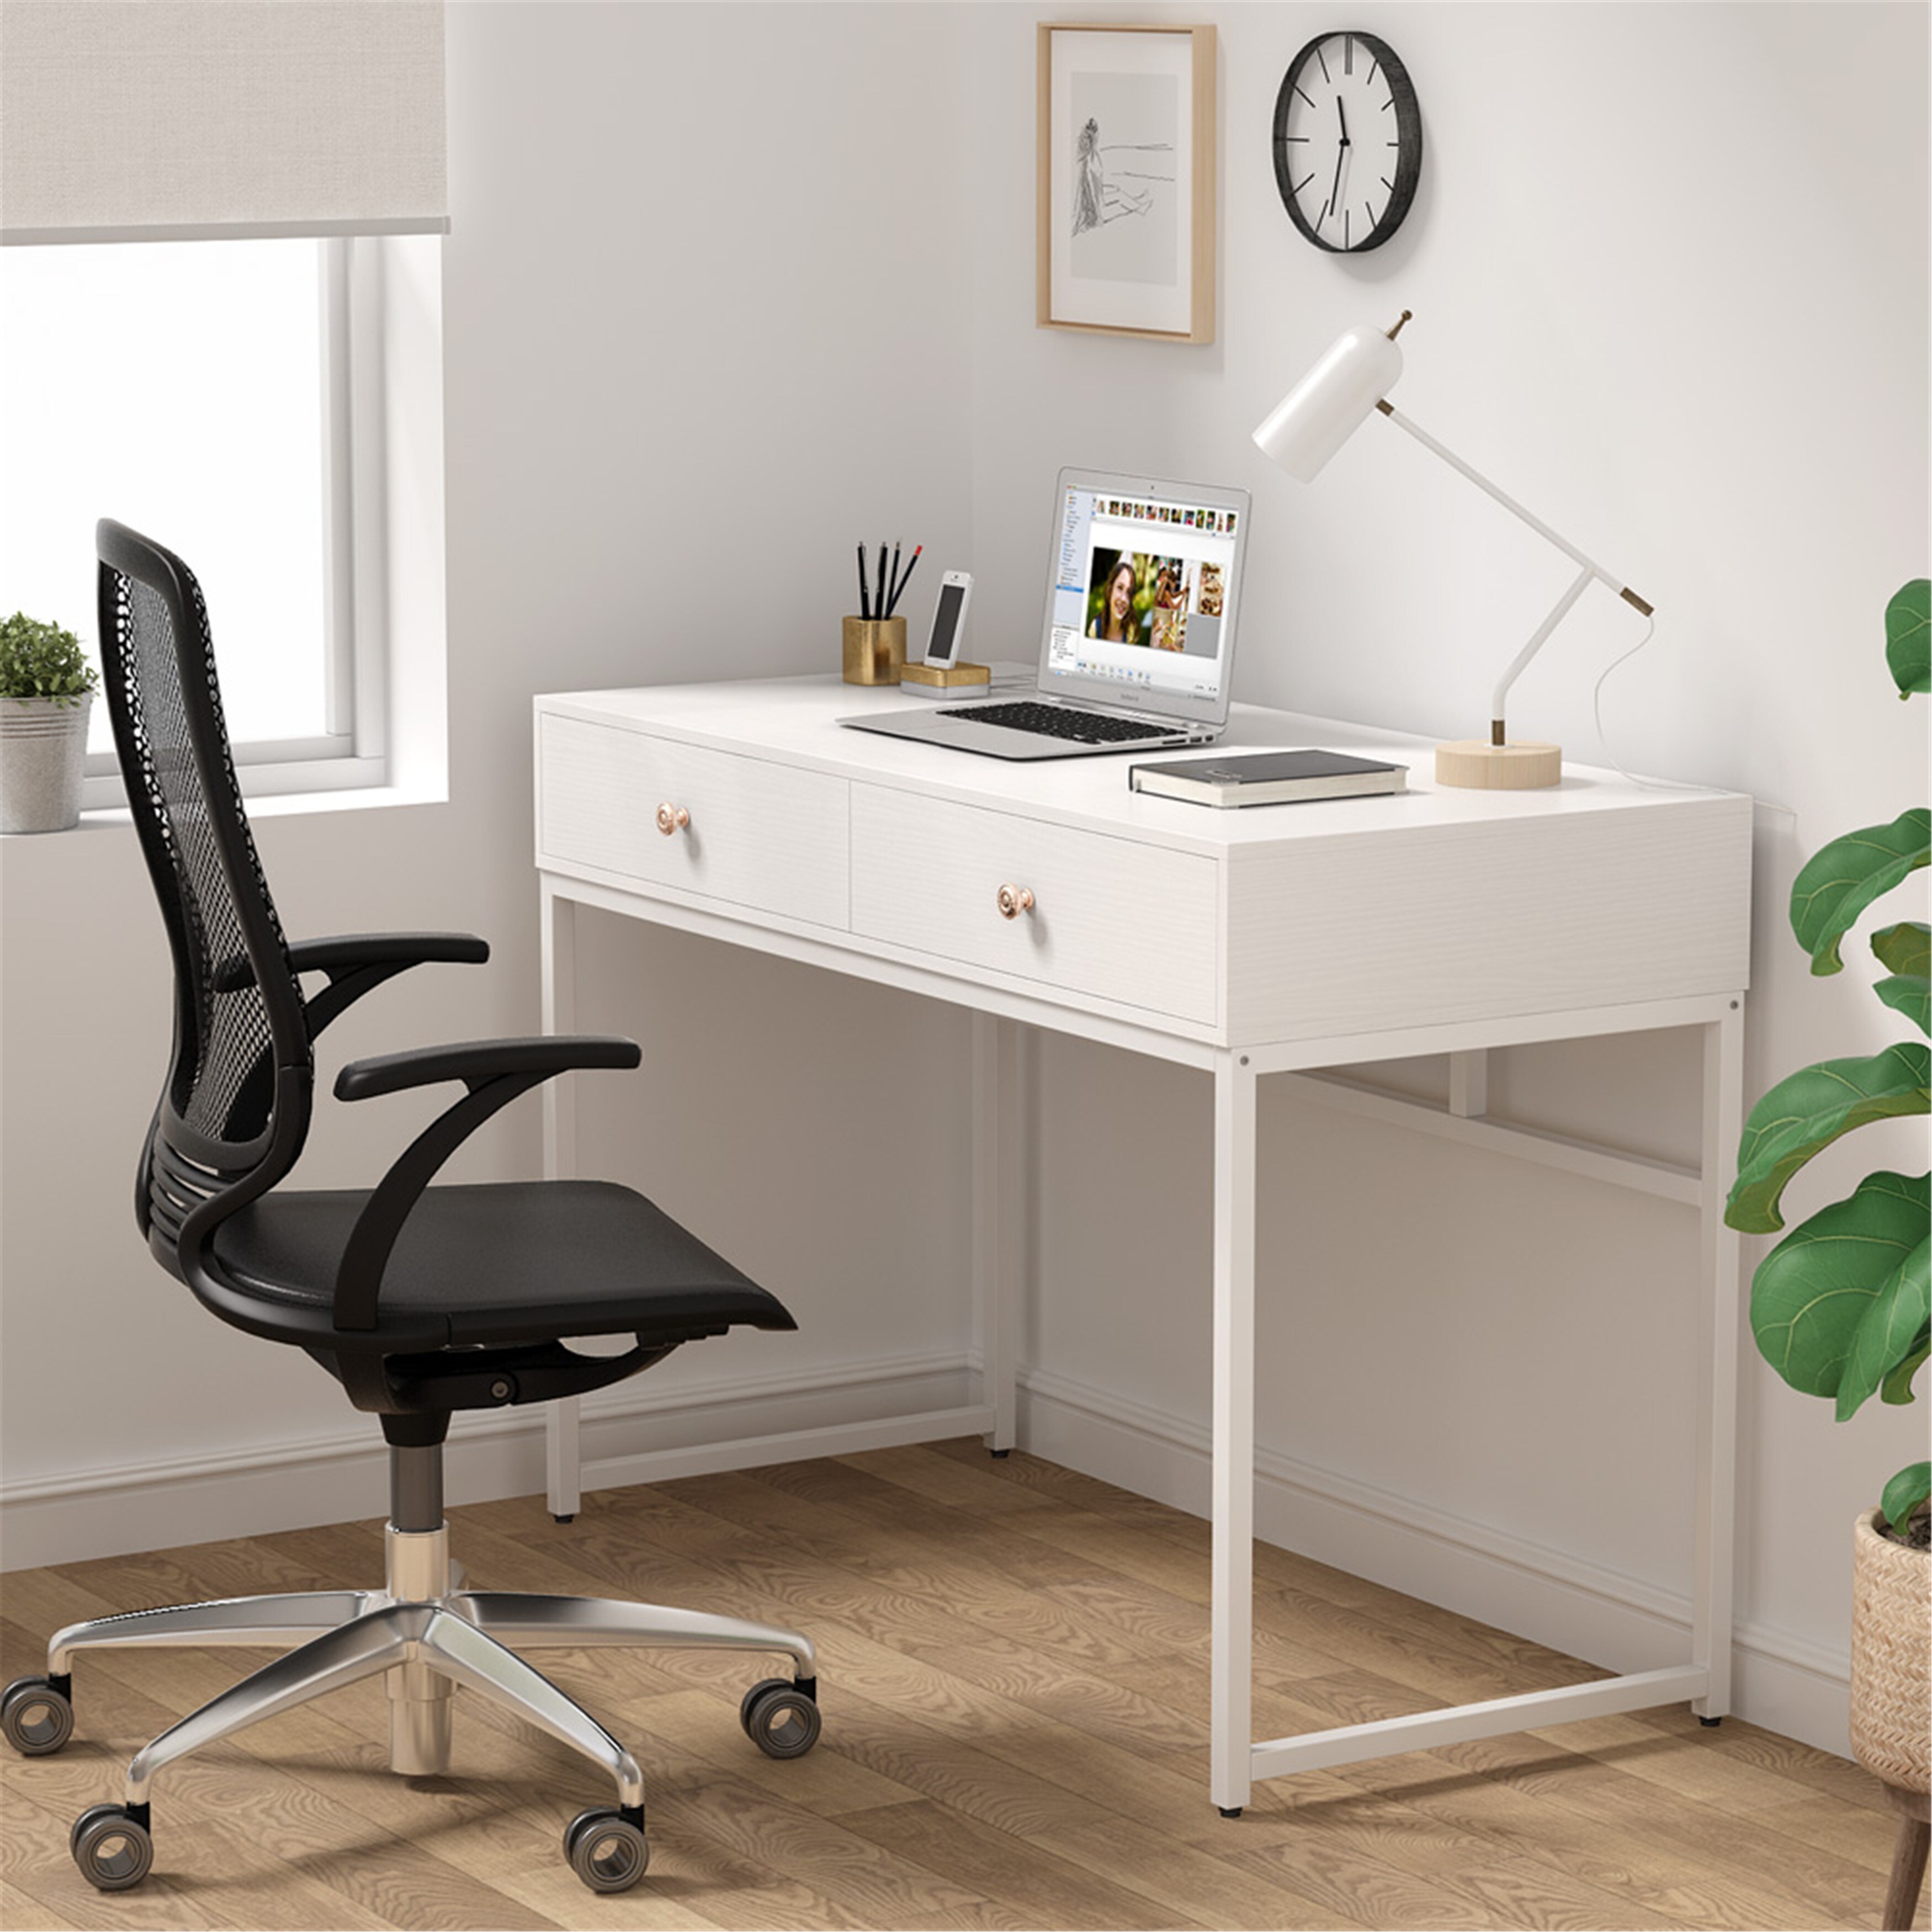 https://ak1.ostkcdn.com/images/products/is/images/direct/da25f25faf9ac1d96eca2e981ed96875edf3b2ba/47-Inch-Computer-Desk%2C-Study-Table-Writing-Desk-with-2-Drawers.jpg